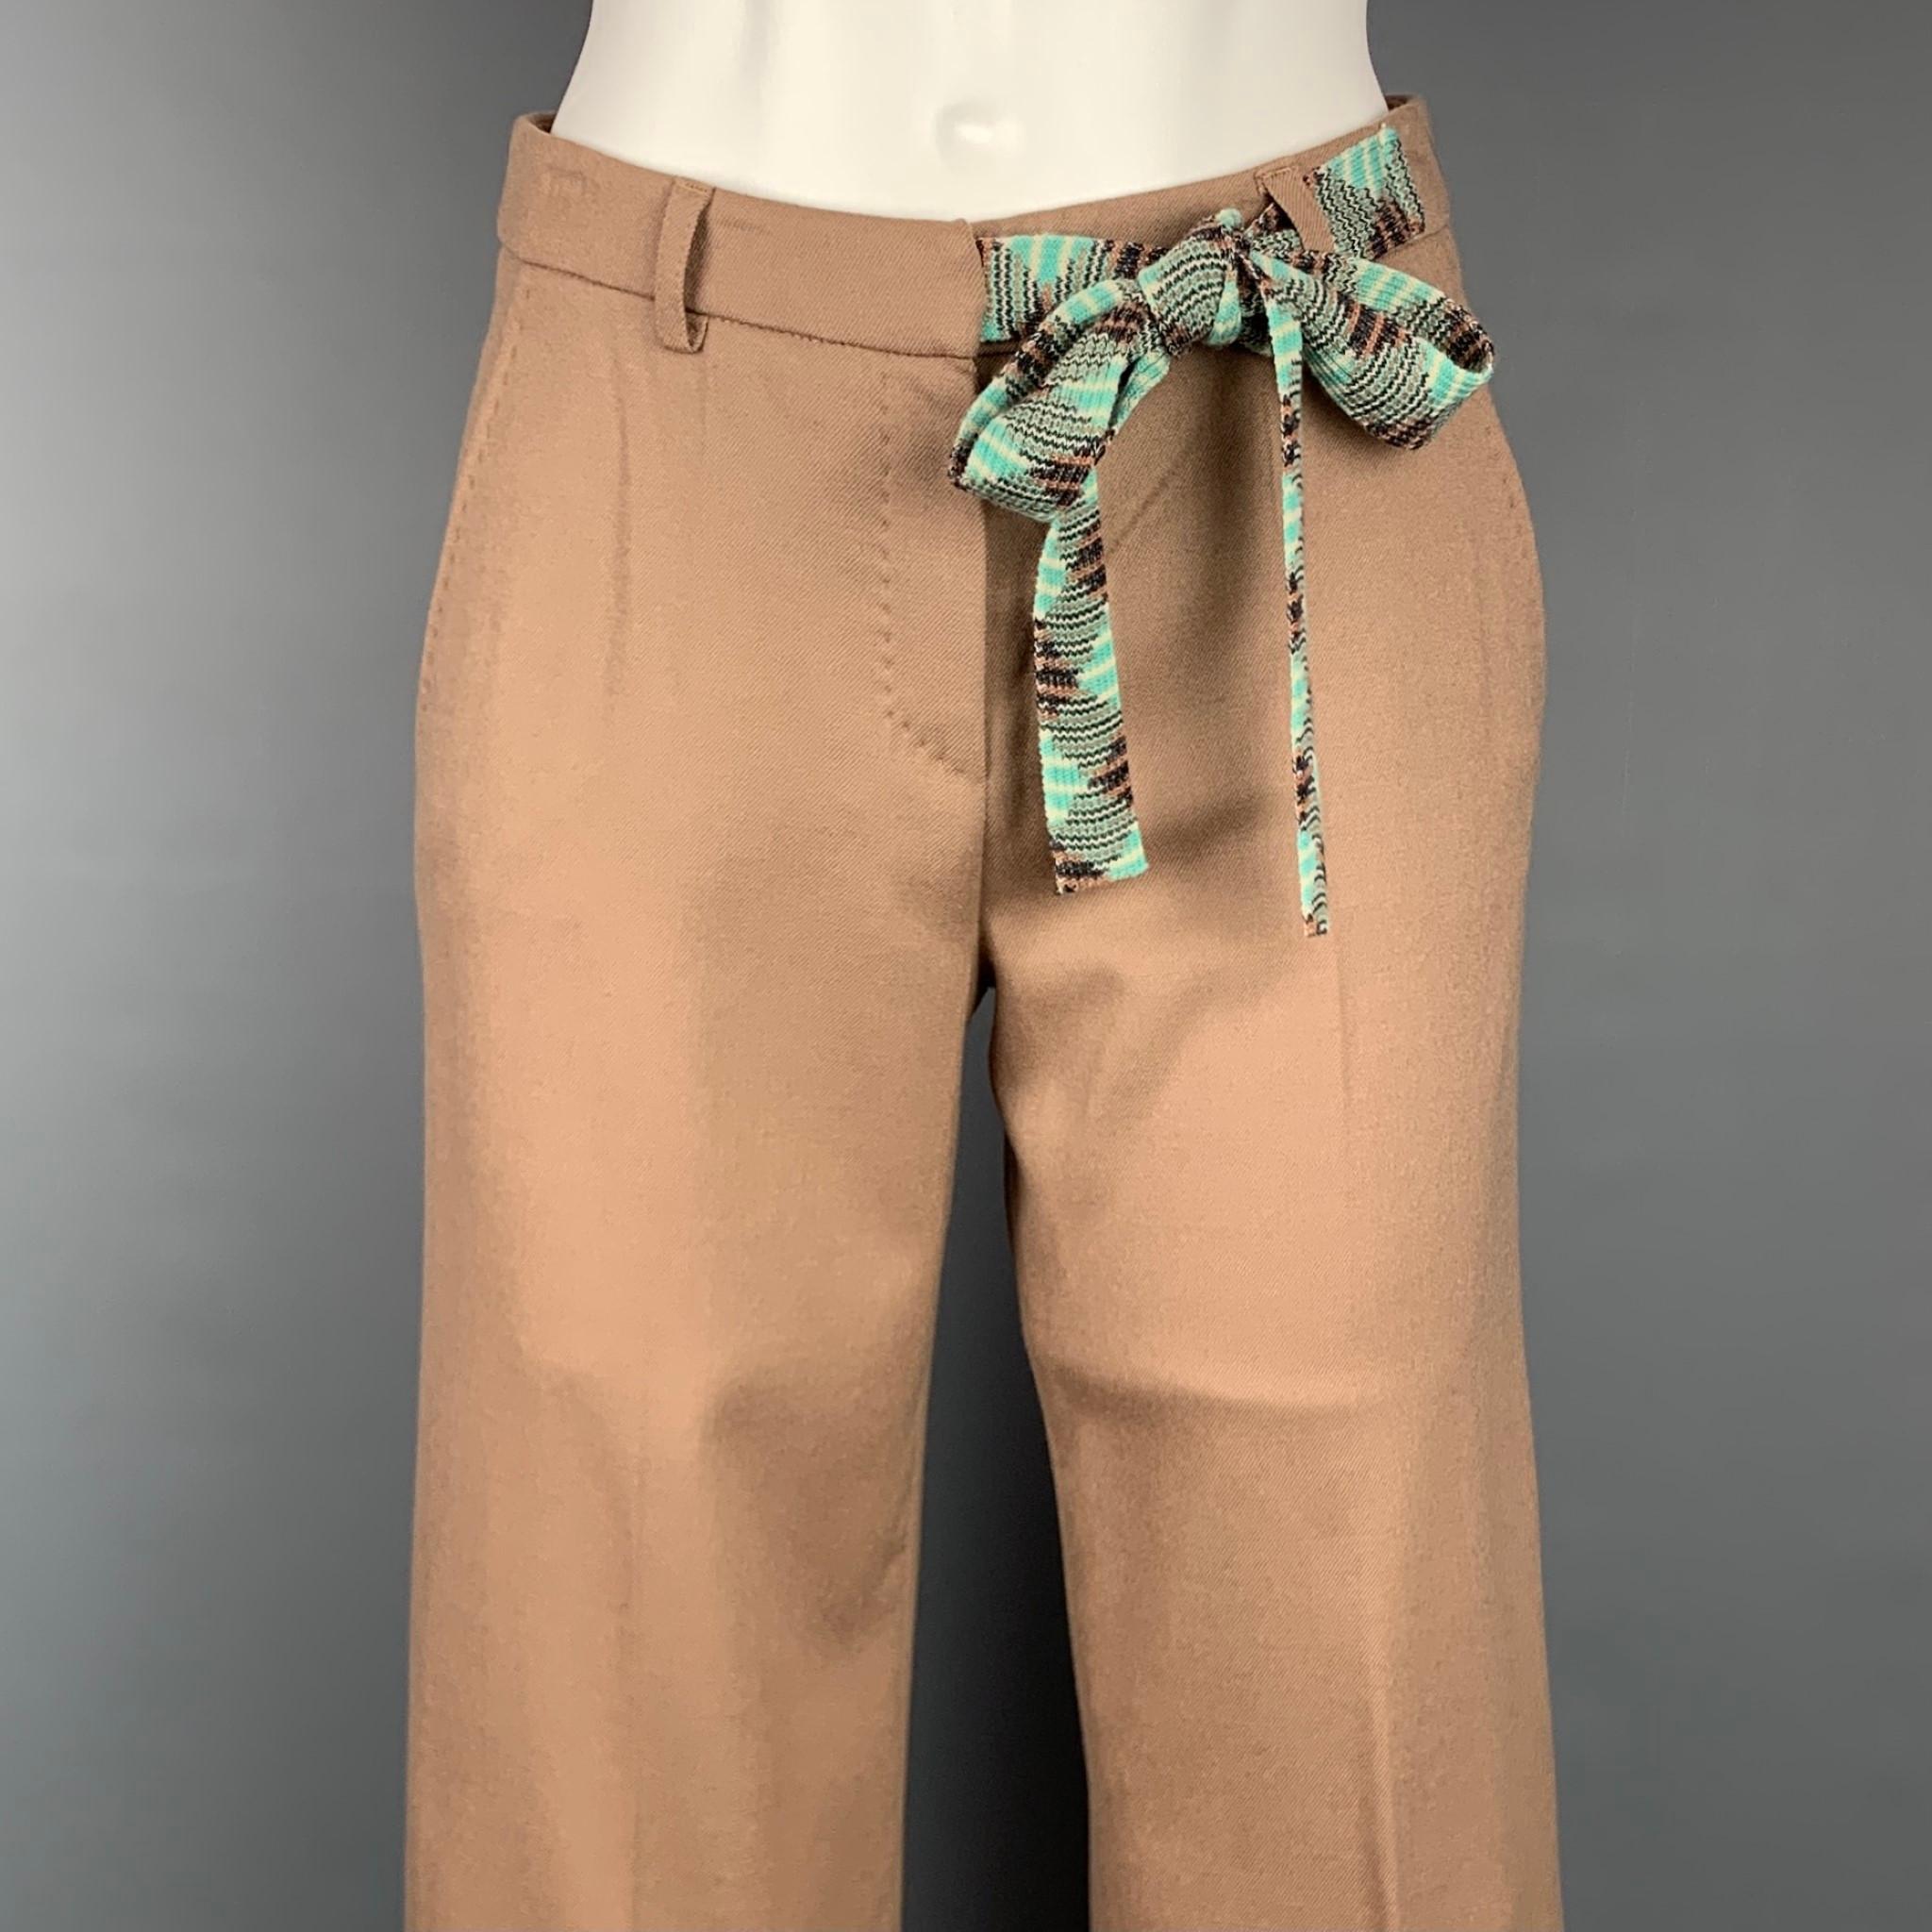 M MISSONI casual pants comes in a khaki wool featuring a cropped style, knitted belt detail, front tab, and a zip fly closure. Made in Italy.

Very Good Pre-Owned Condition.
Marked: I 38 / DCH ANL 32 / EFB 34 / GB 6 / US 2

Measurements:

Waist: 28